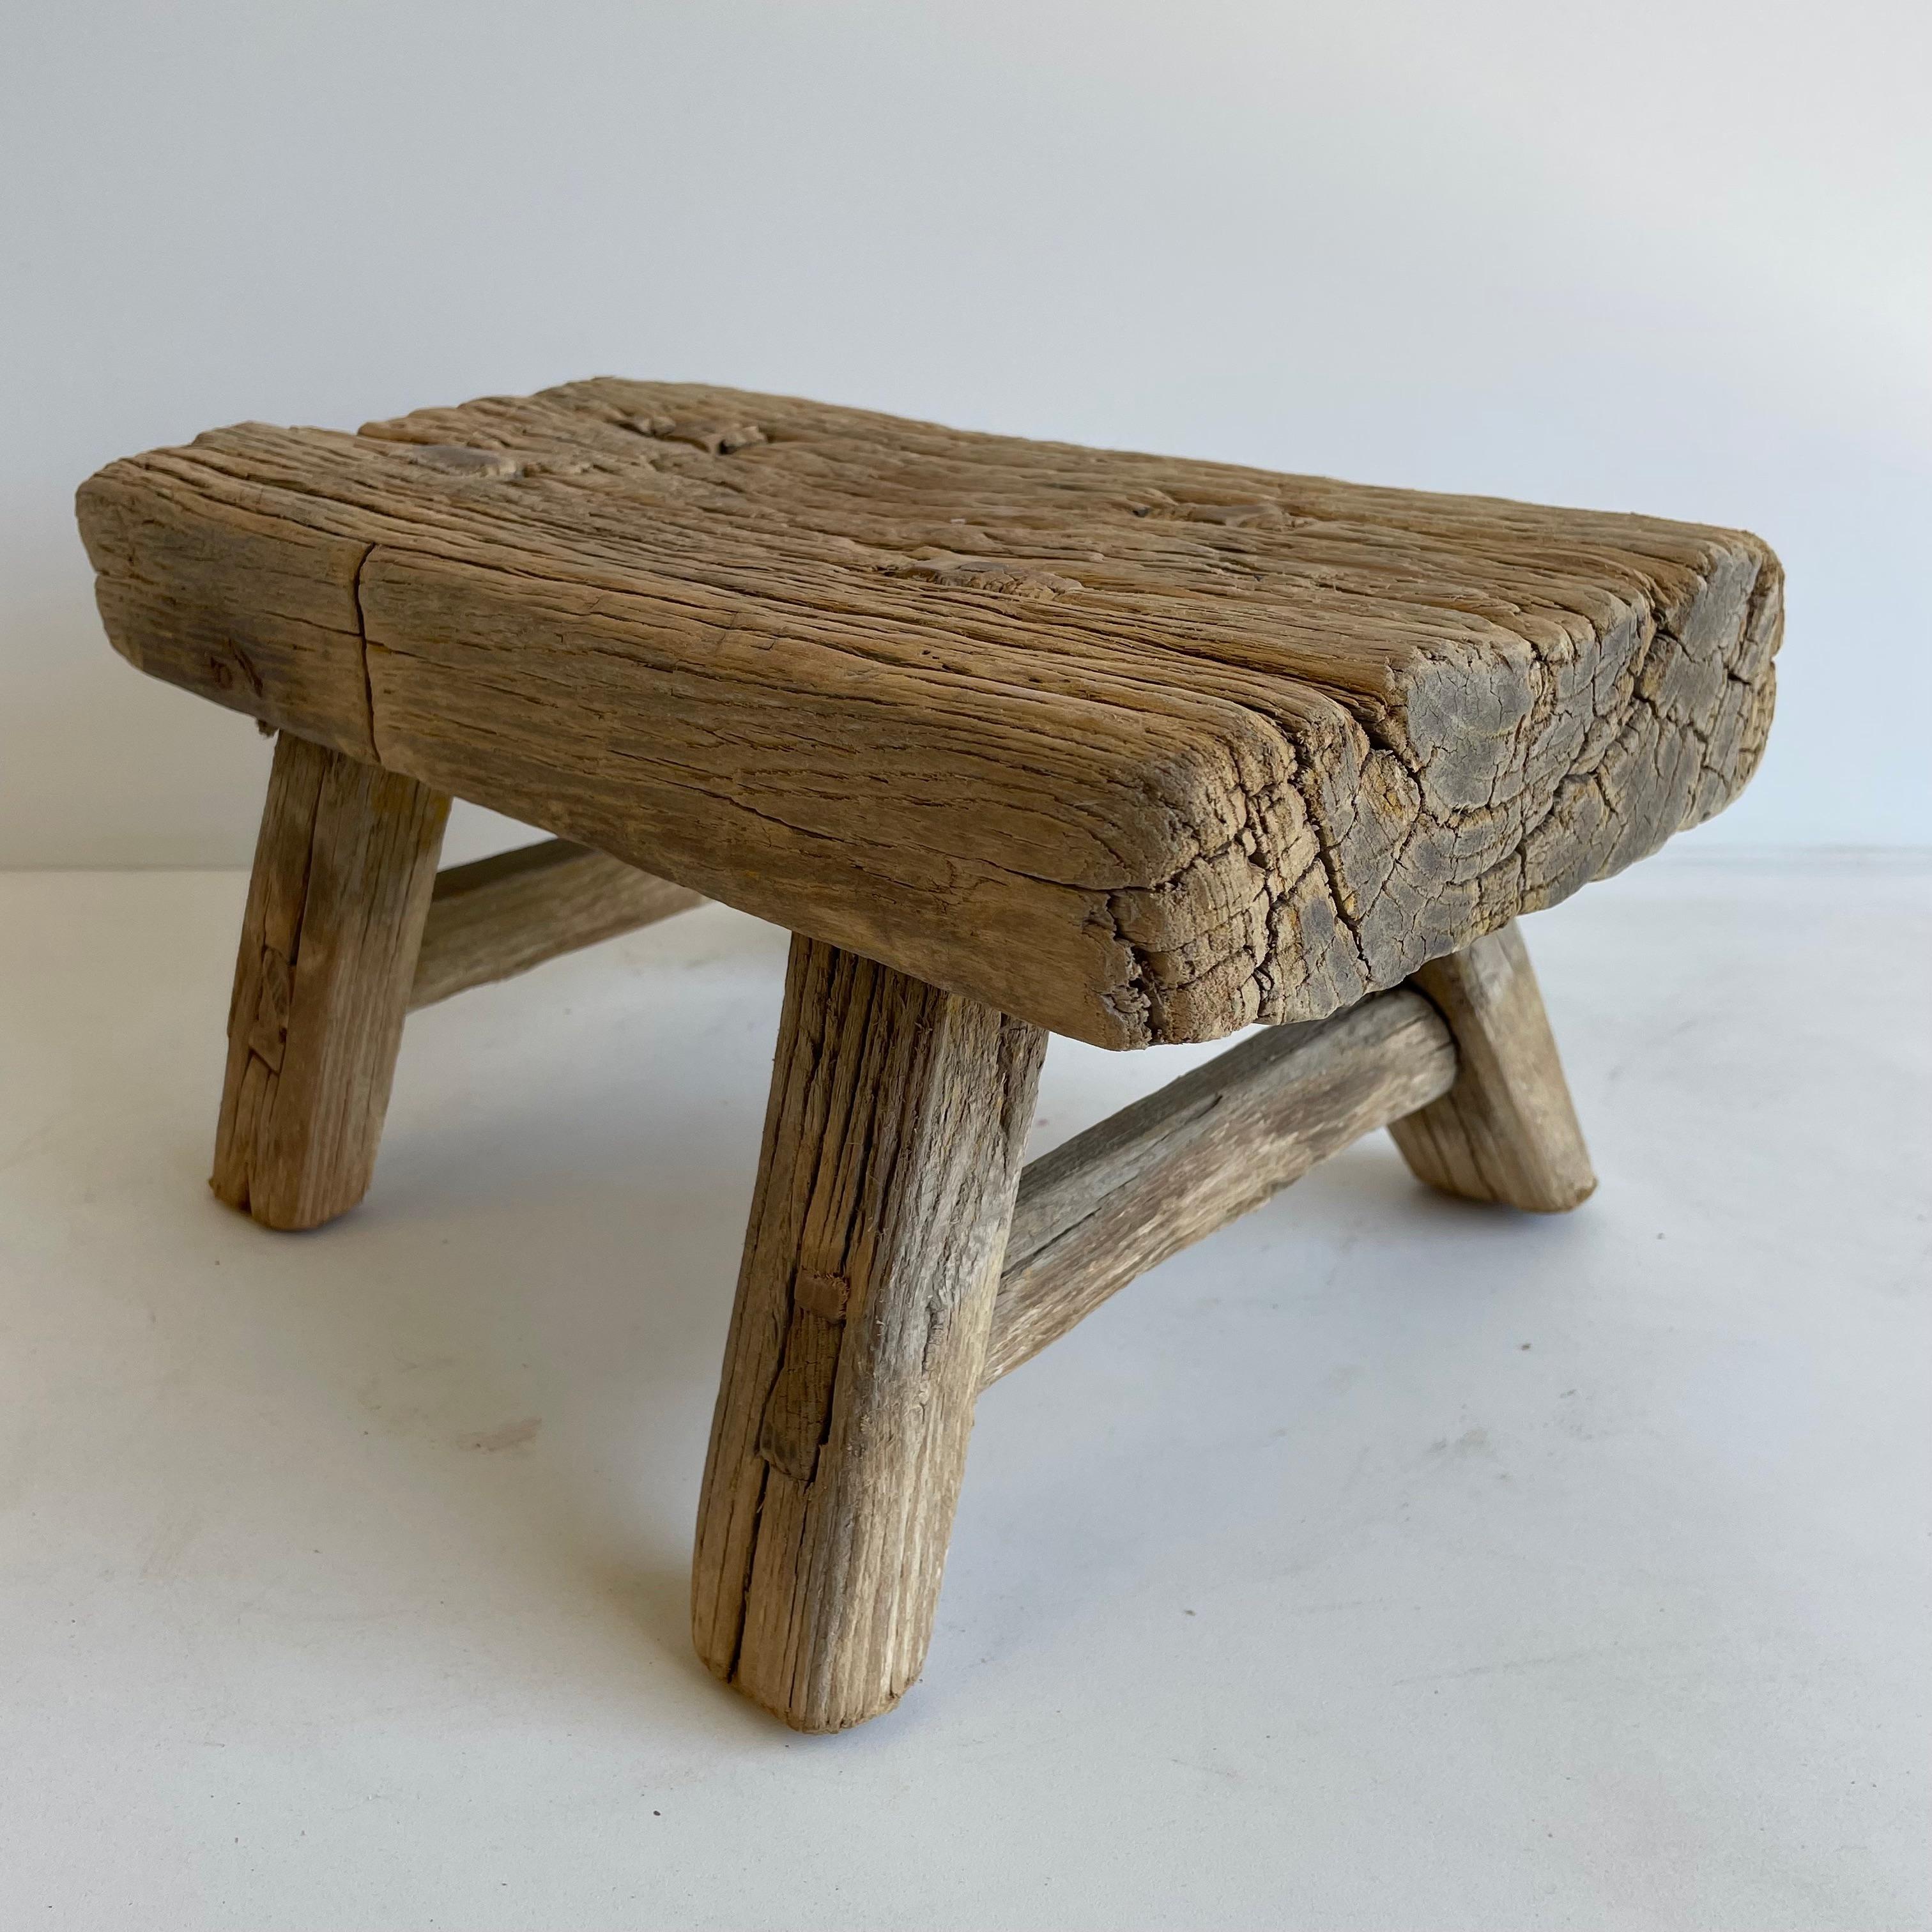 Asian Antique Elm Wood Mini Stool with Thick Top